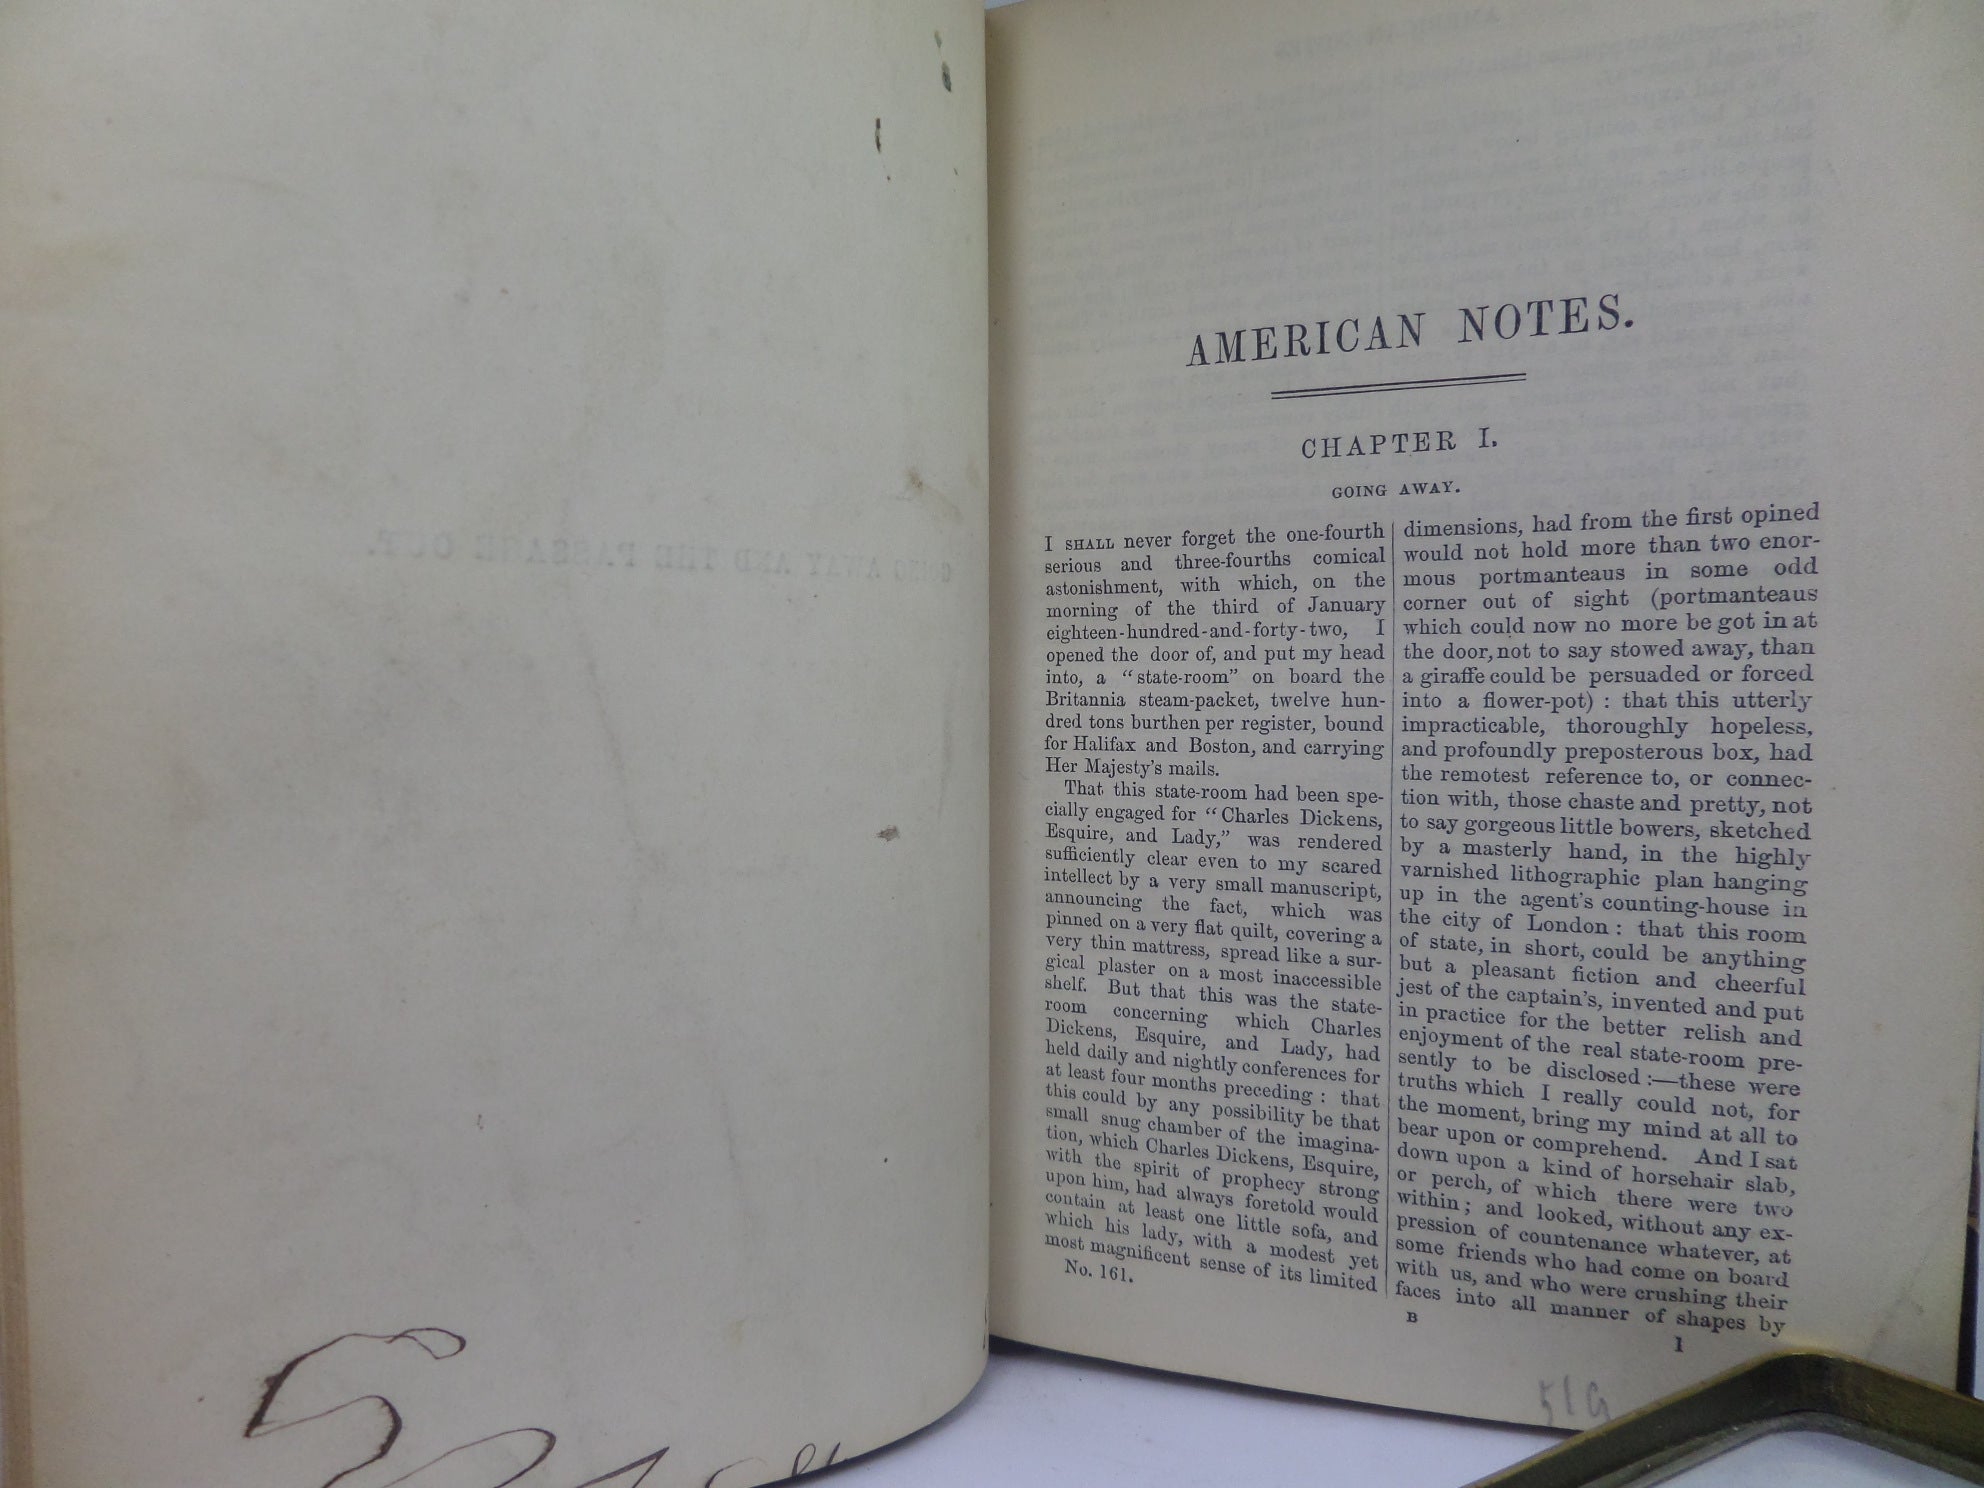 AMERICAN NOTES BY CHARLES DICKENS 1850 LEATHER BINDING